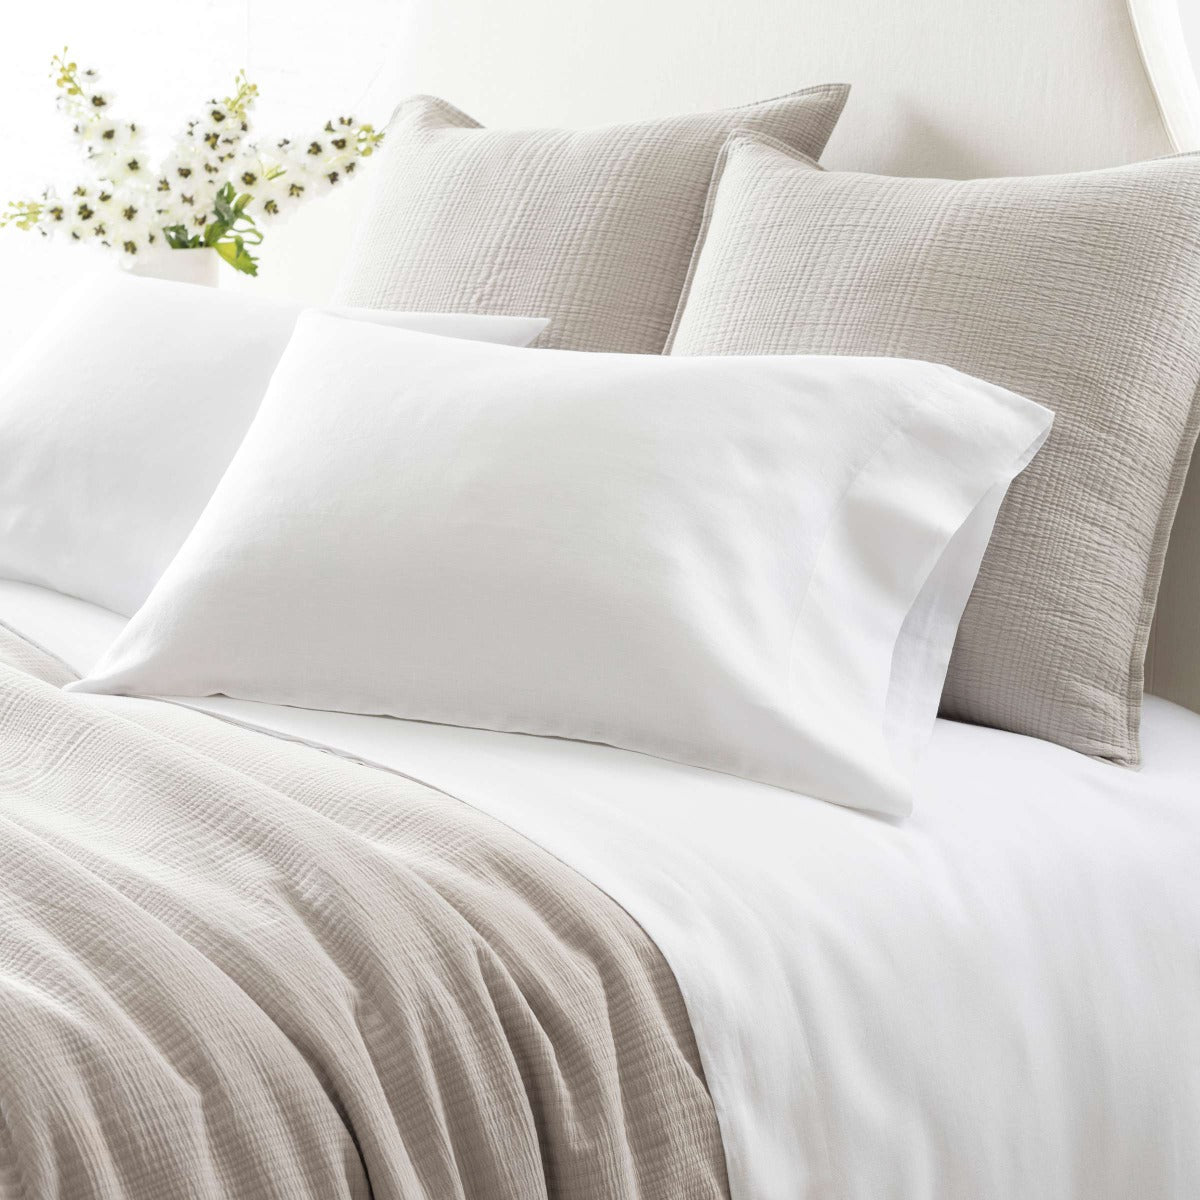 Lush Linen White Sheet Set styled with grey bedding. Styled view. 